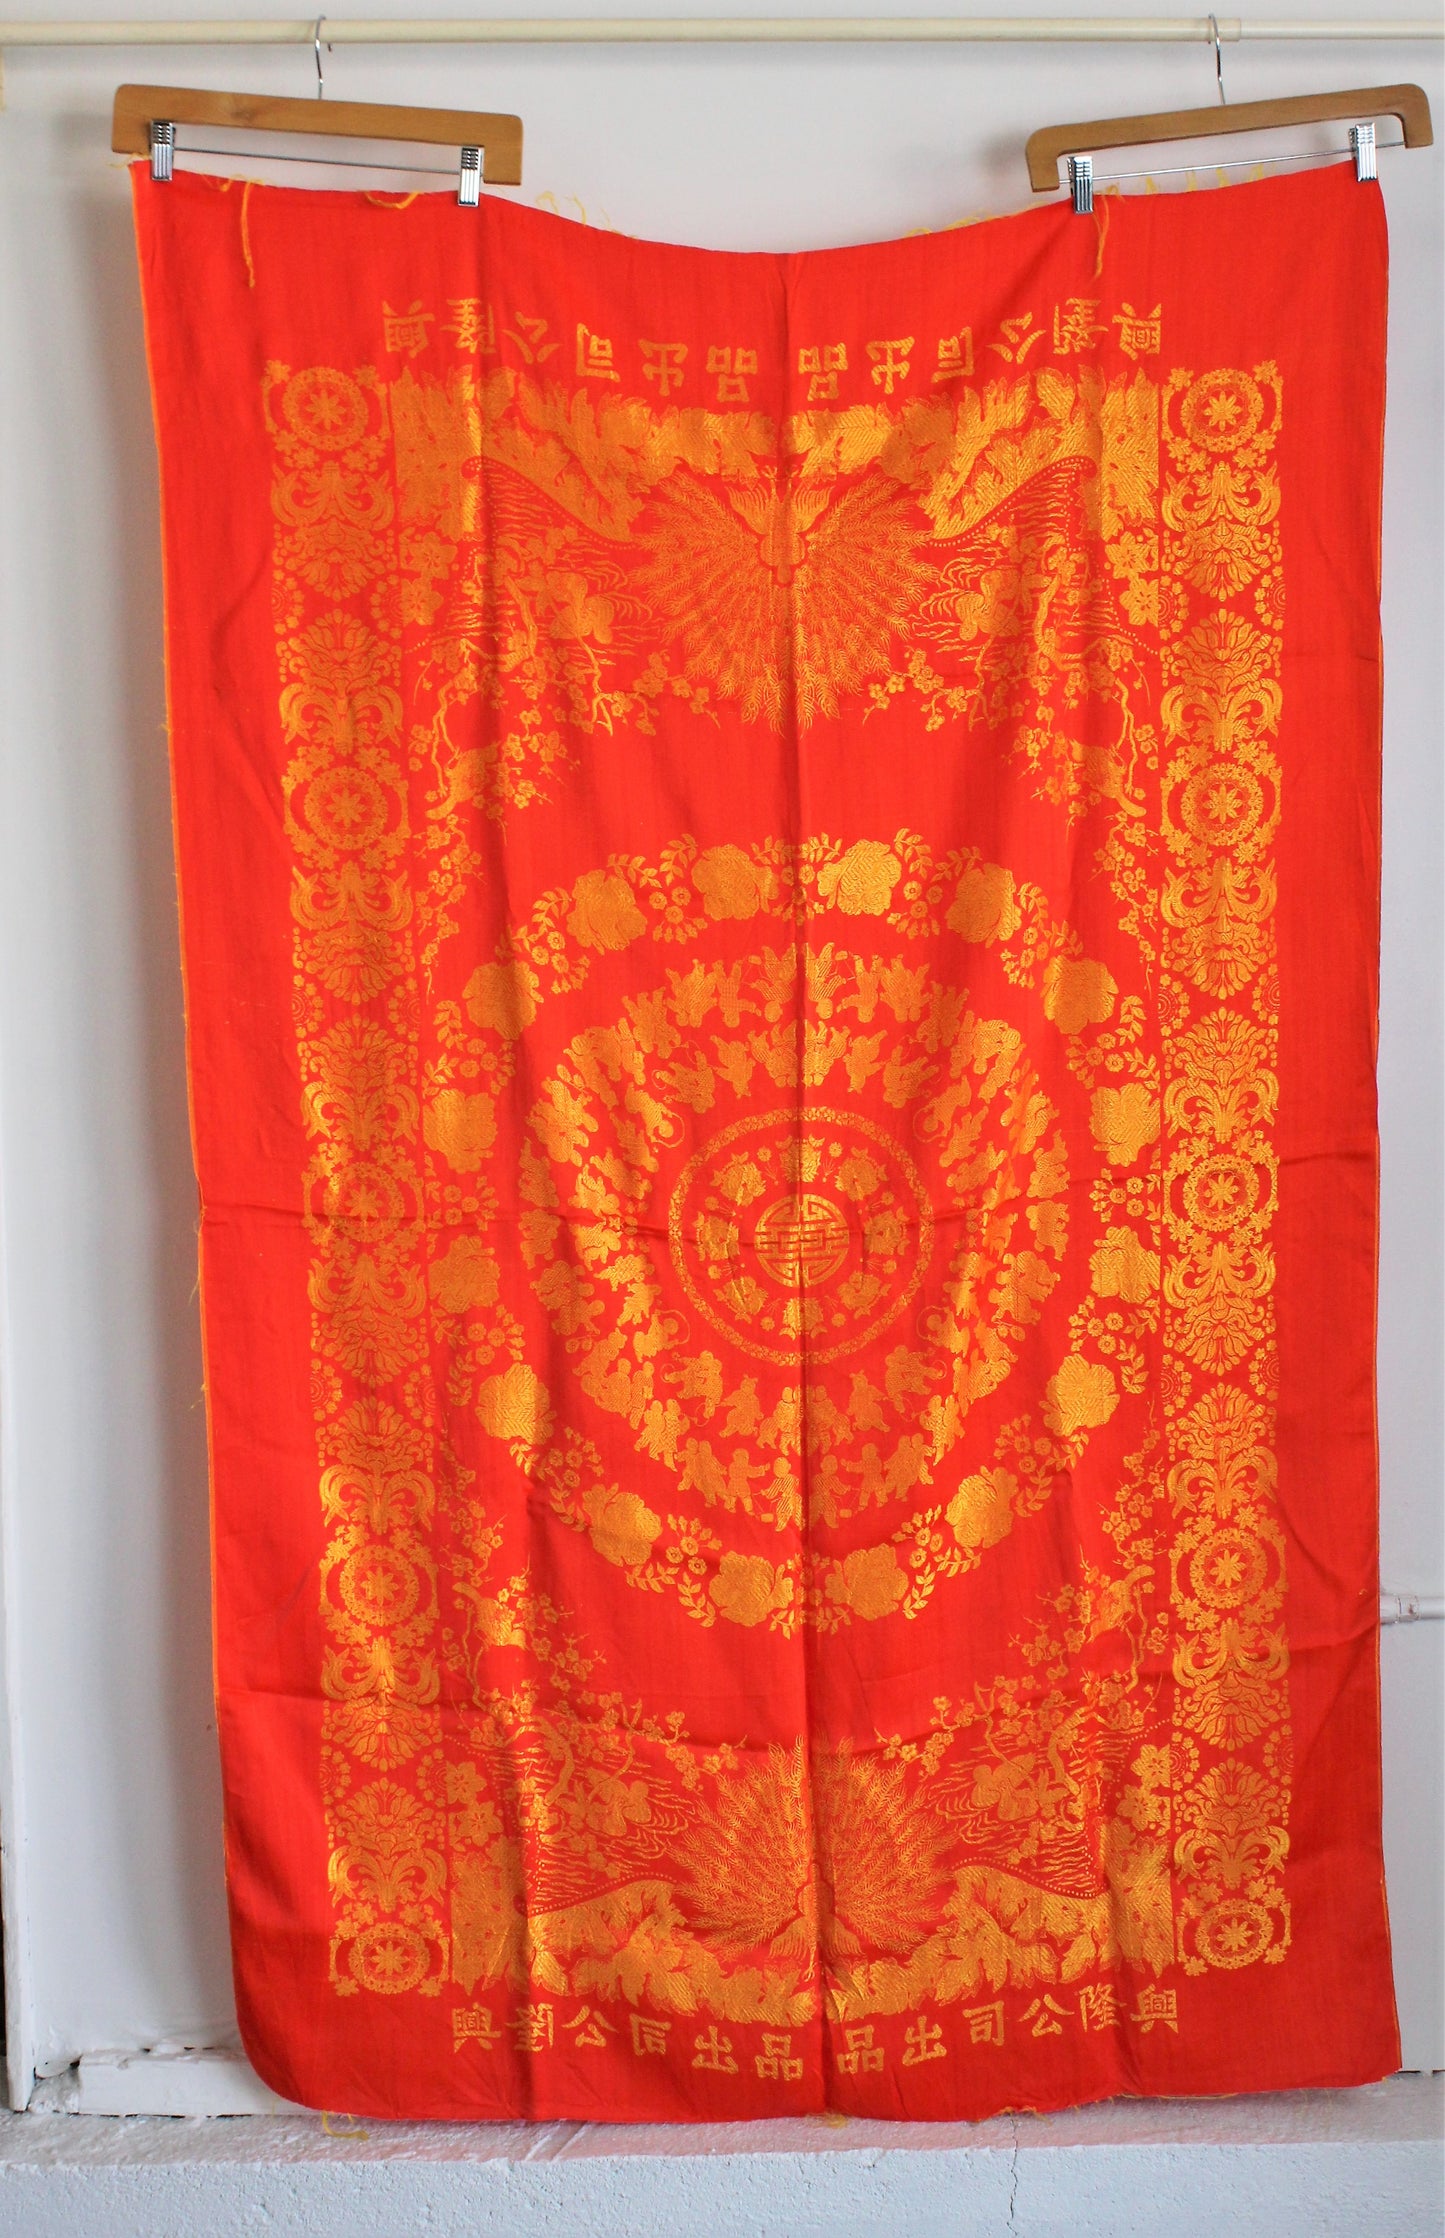 Vintage Chinese Orange and Gold Damask Tablecloth 